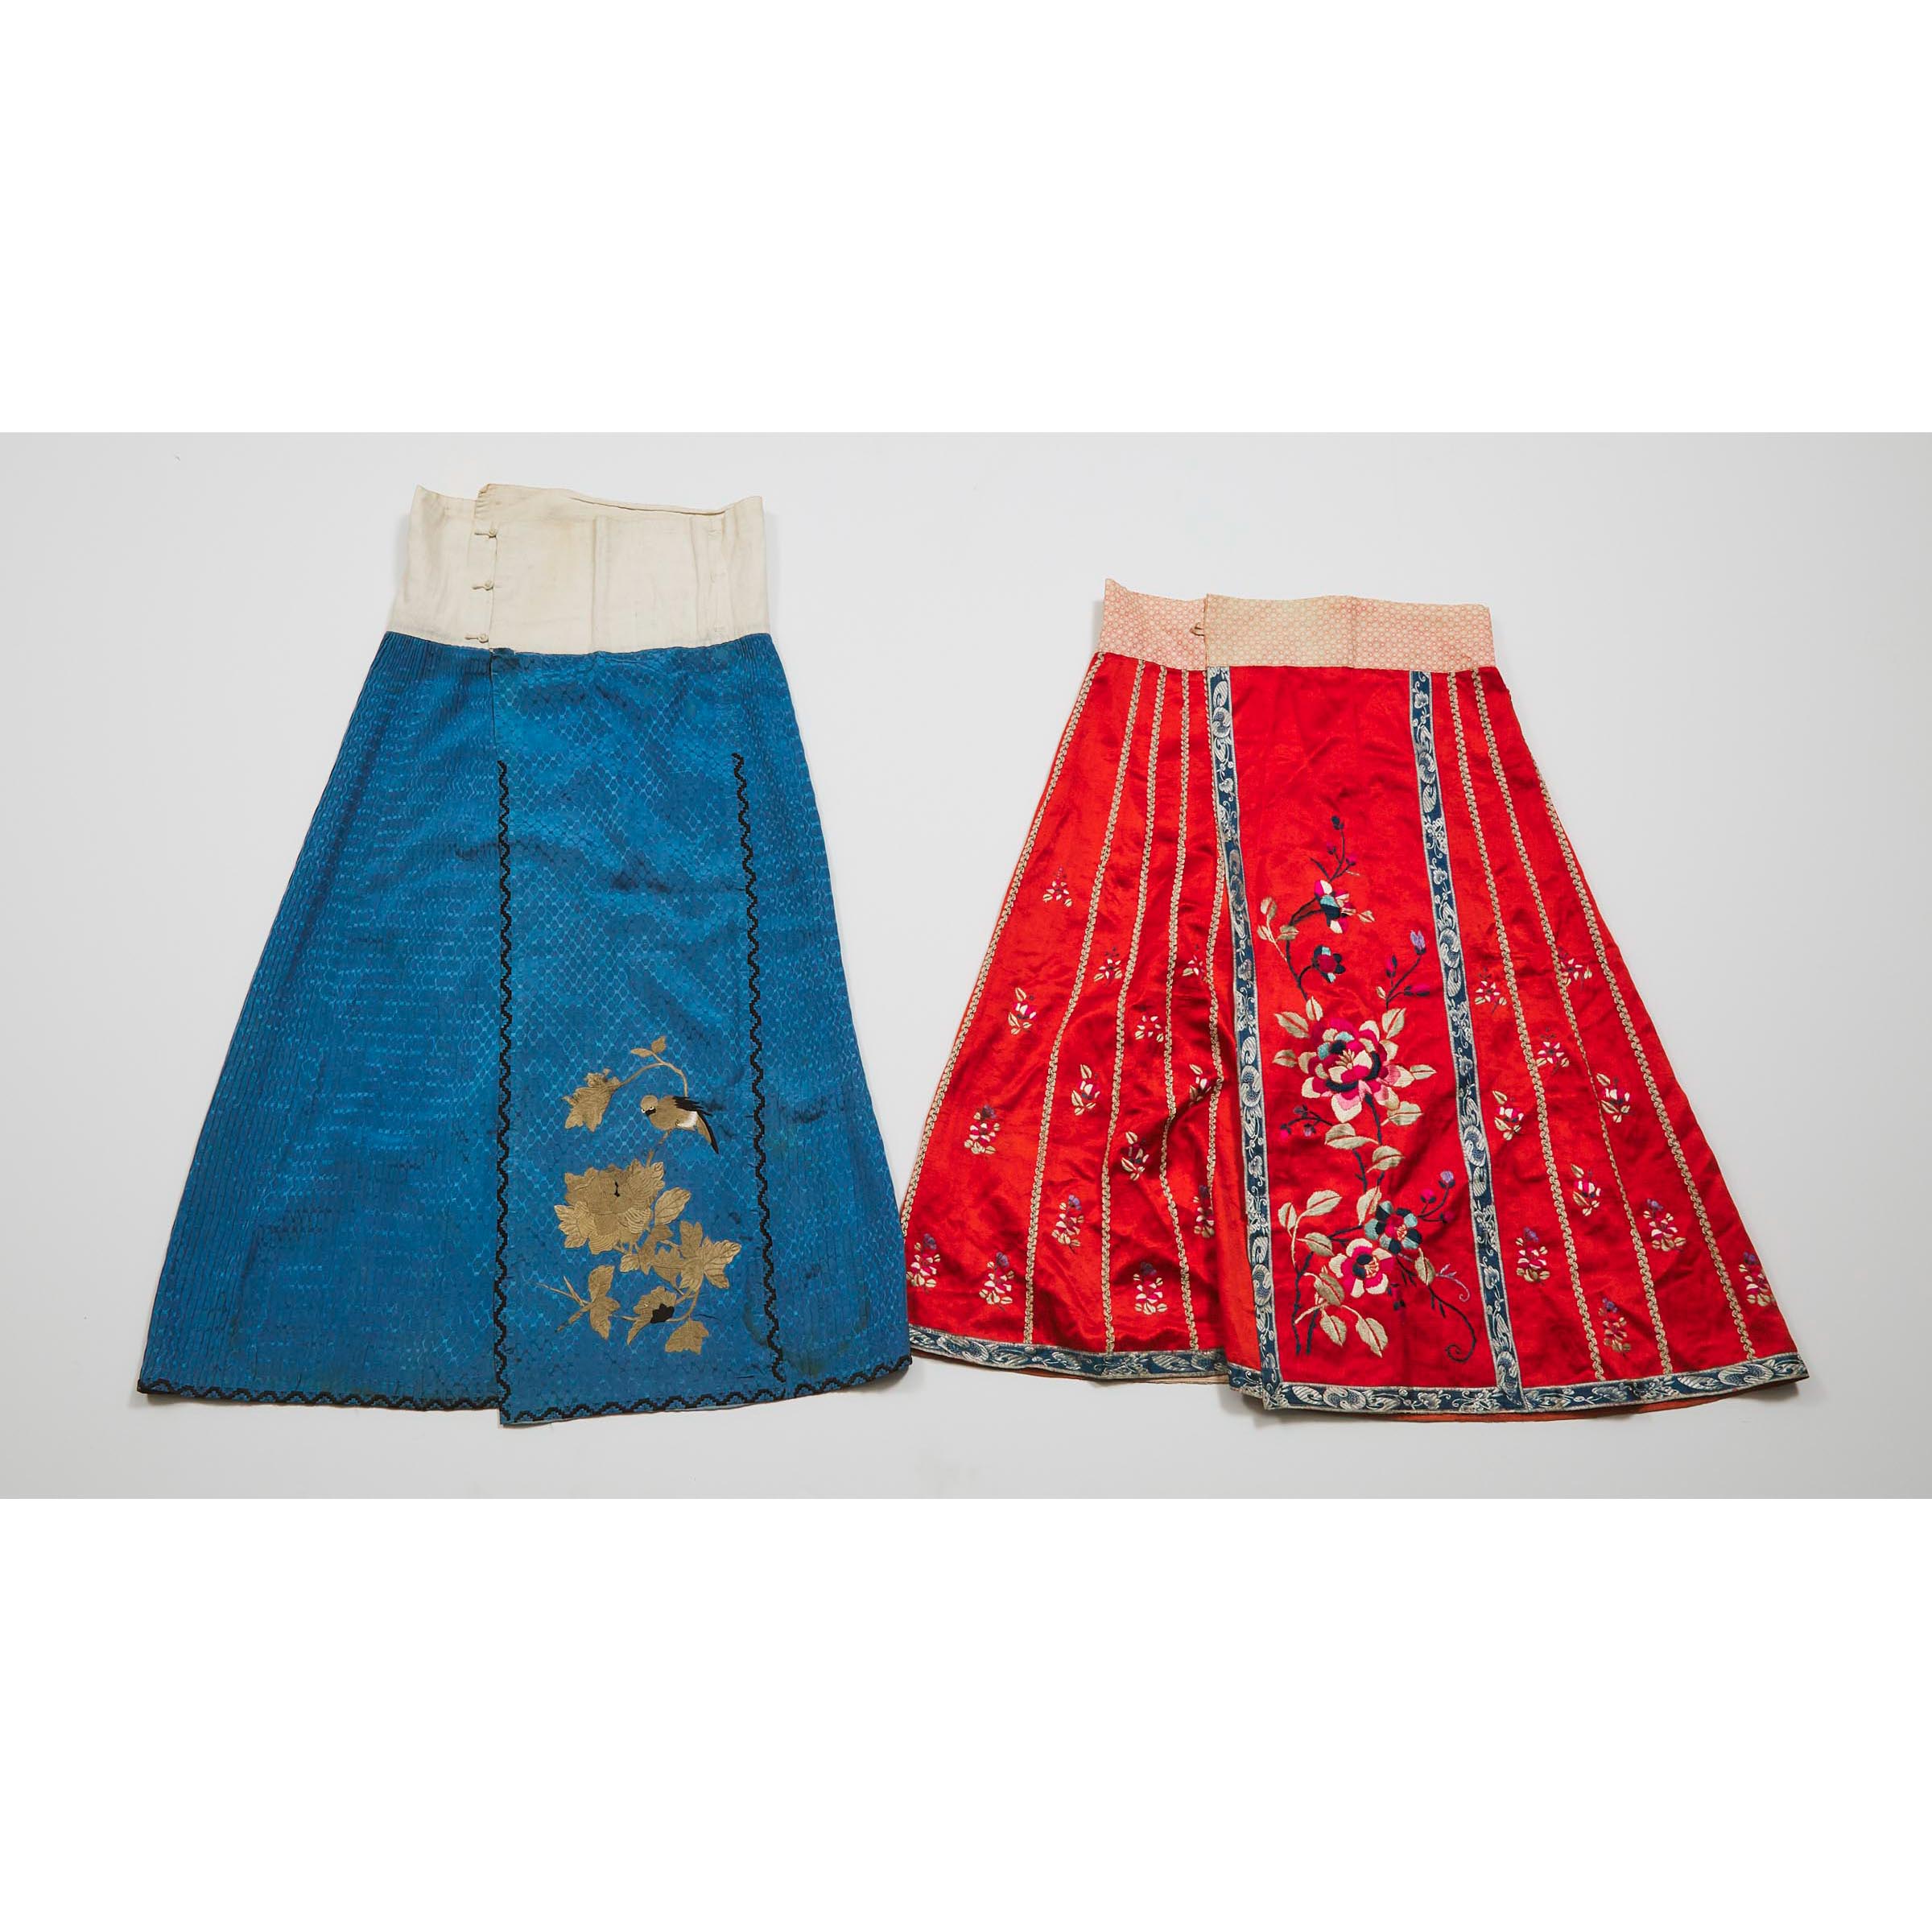 Two Chinese Embroidered Silk Skirts,